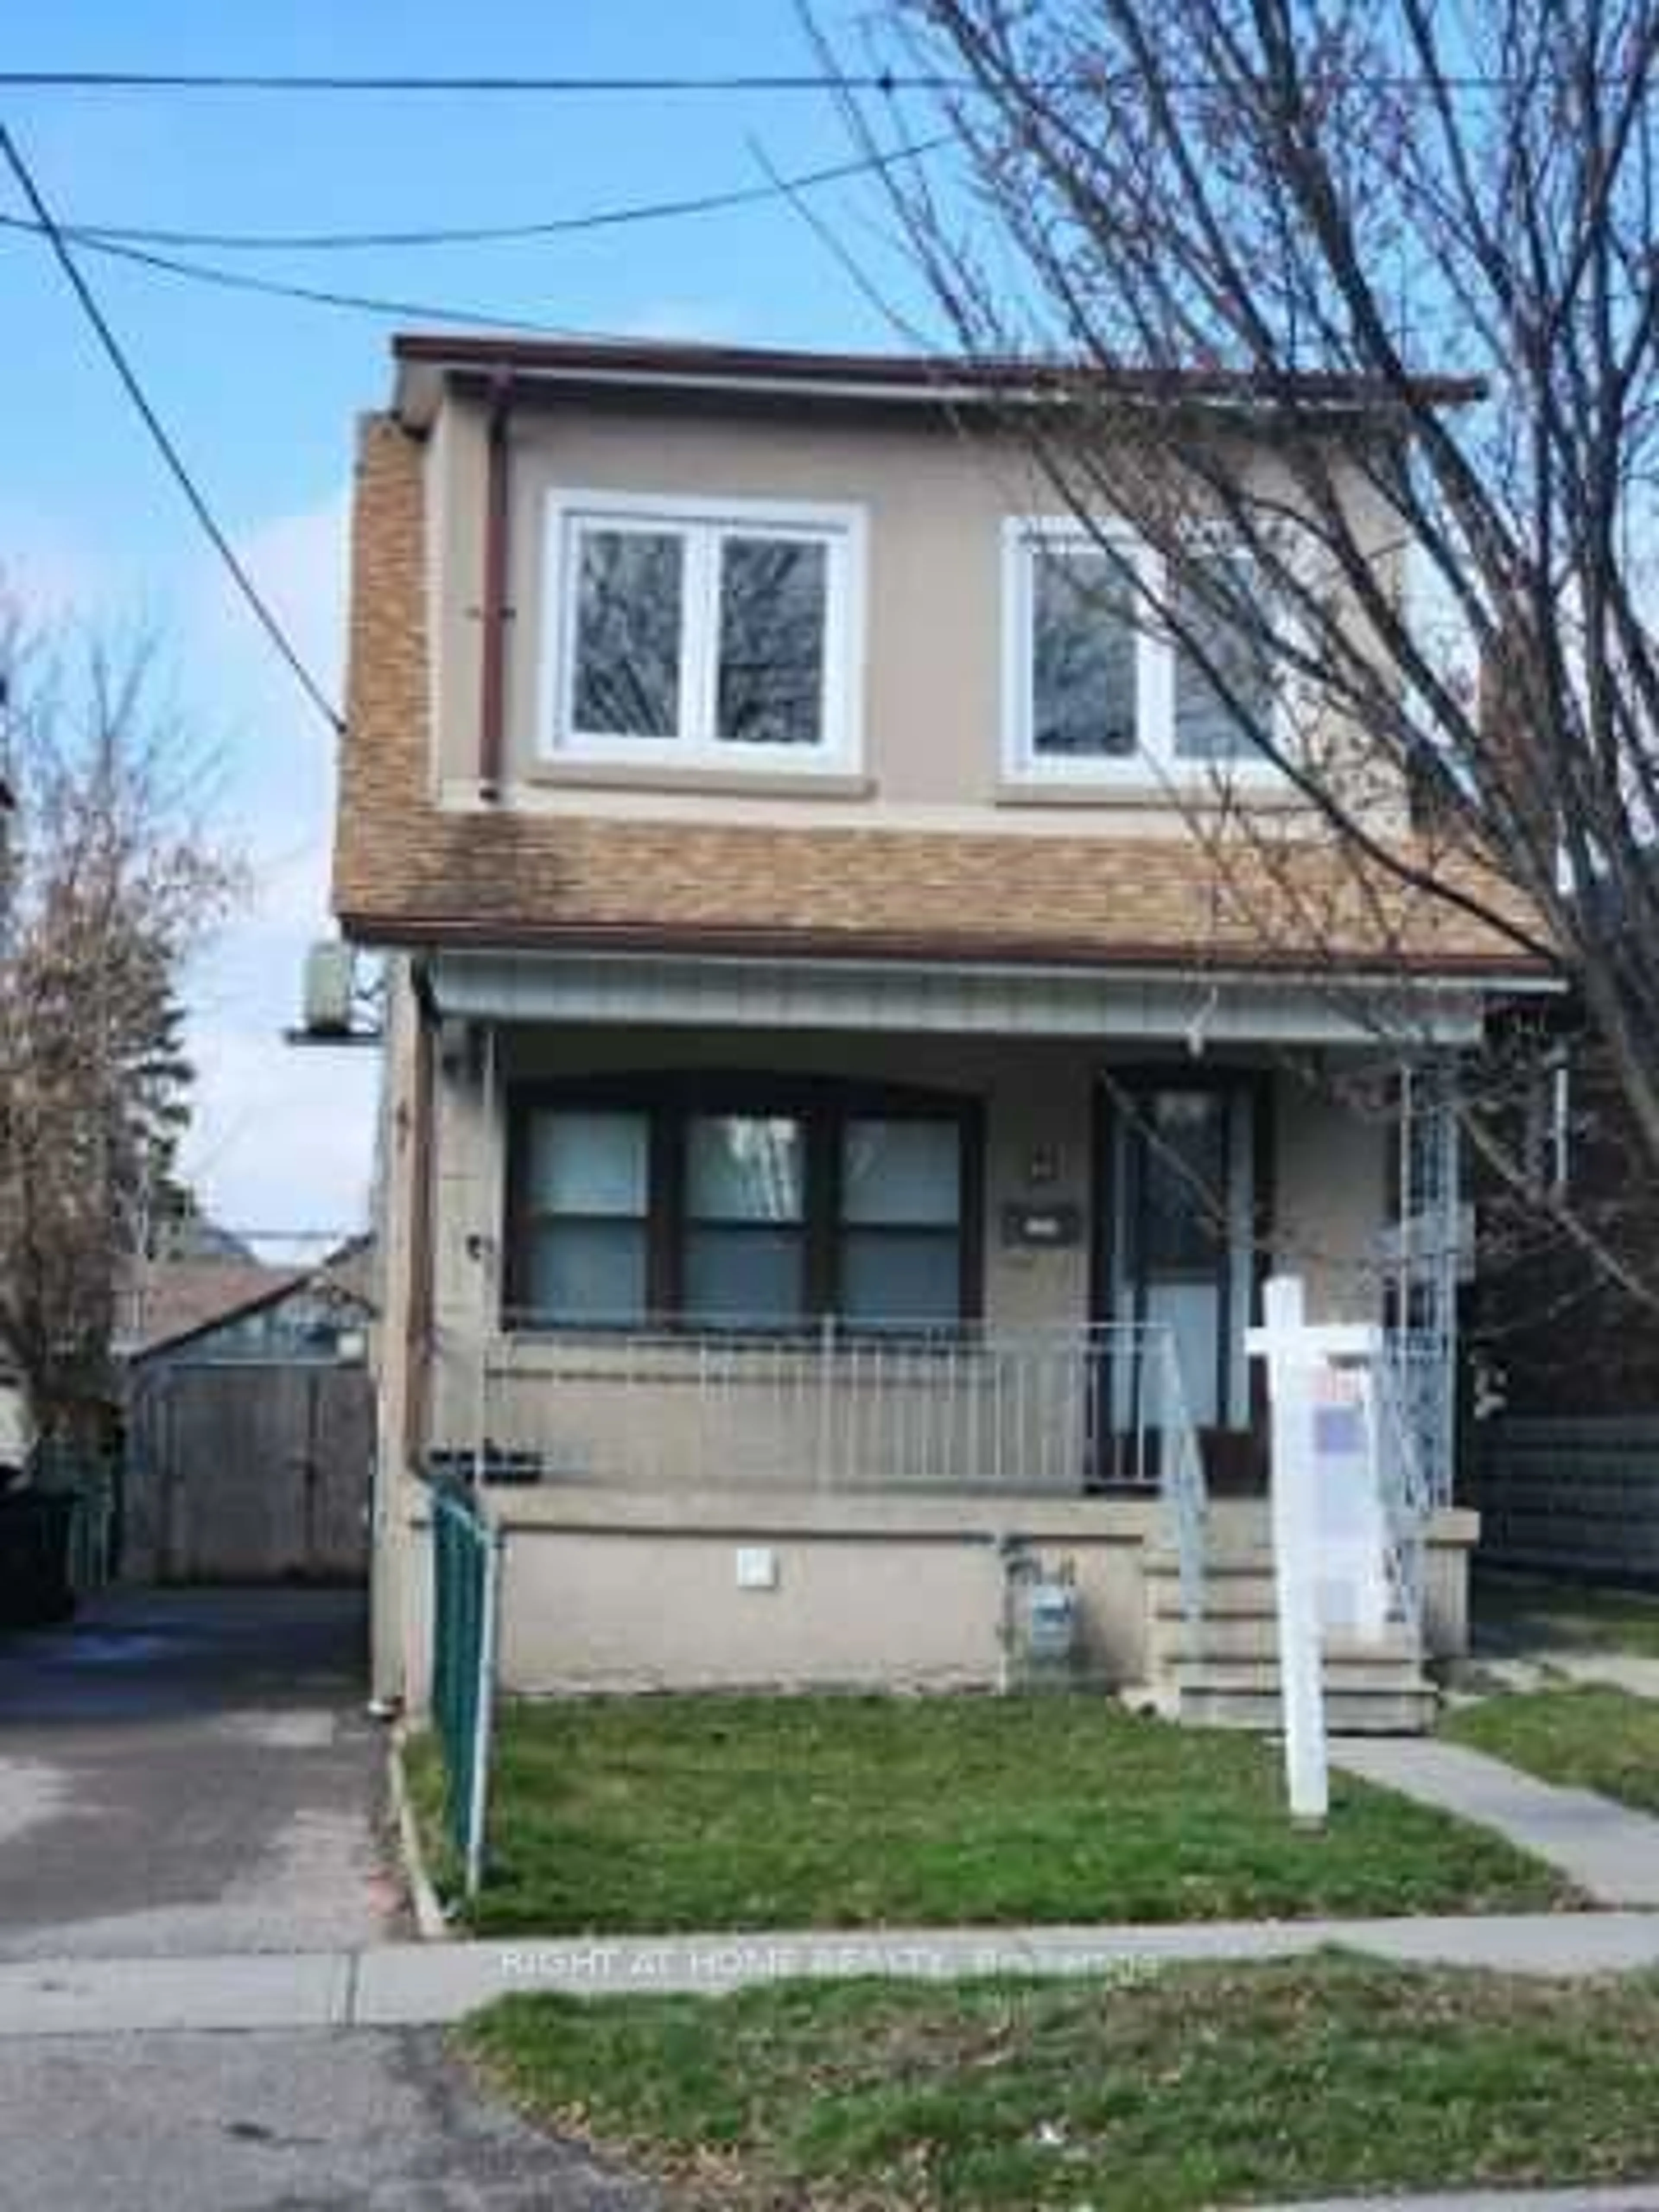 Frontside or backside of a home for 28 Fairbank Ave, Toronto Ontario M6E 3Y4